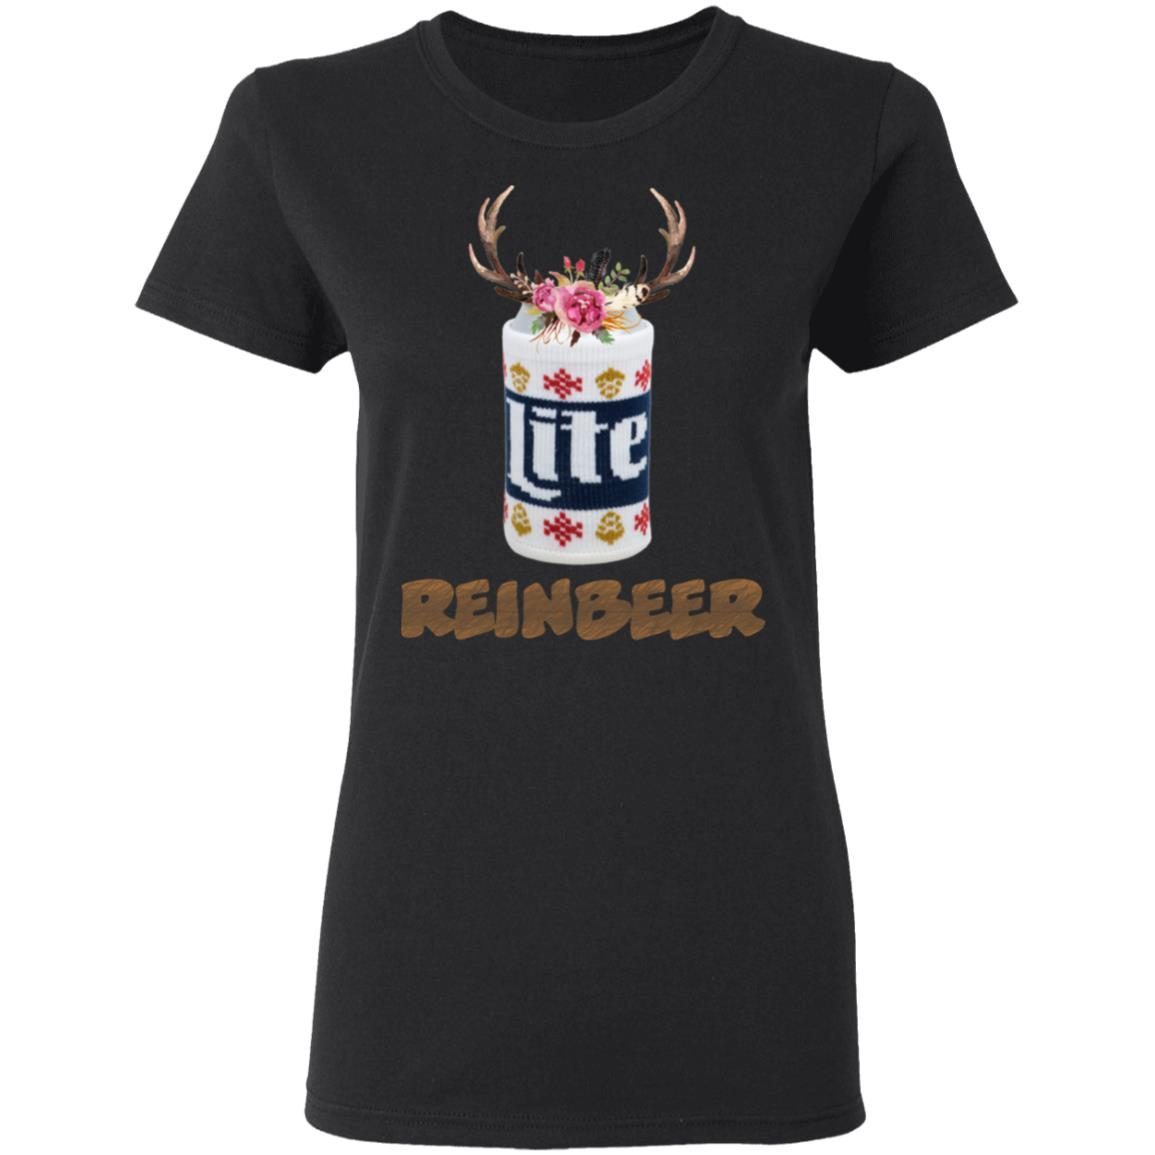 Can Miller Lite Reinbeer Funny Christmas Sweater 1